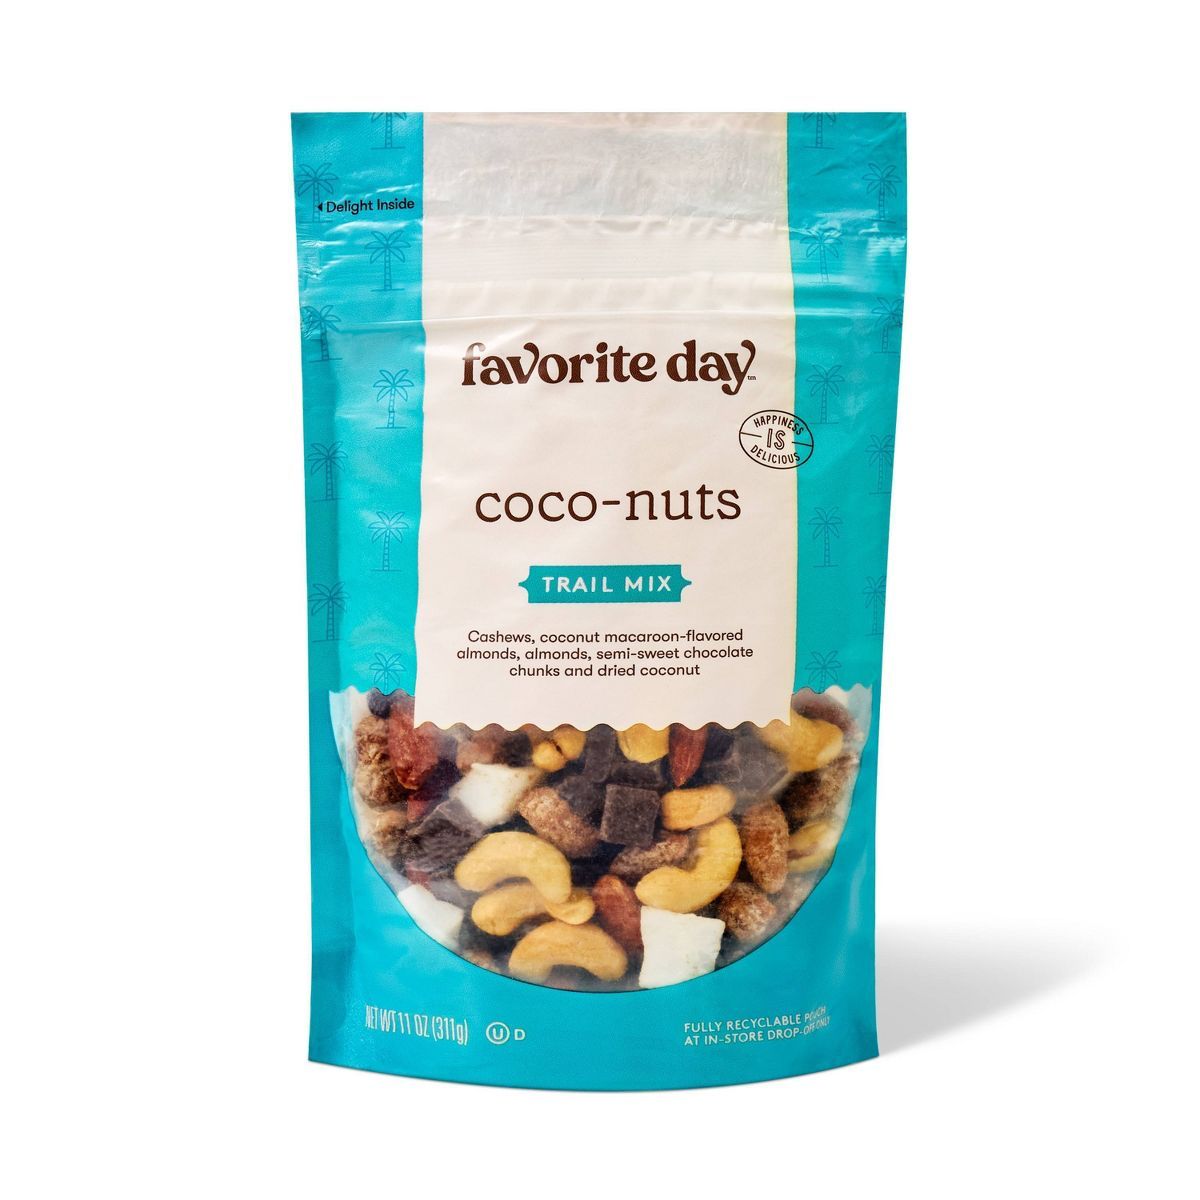 Coco Nuts Trail Mix - 11oz - Favorite Day™ | Target